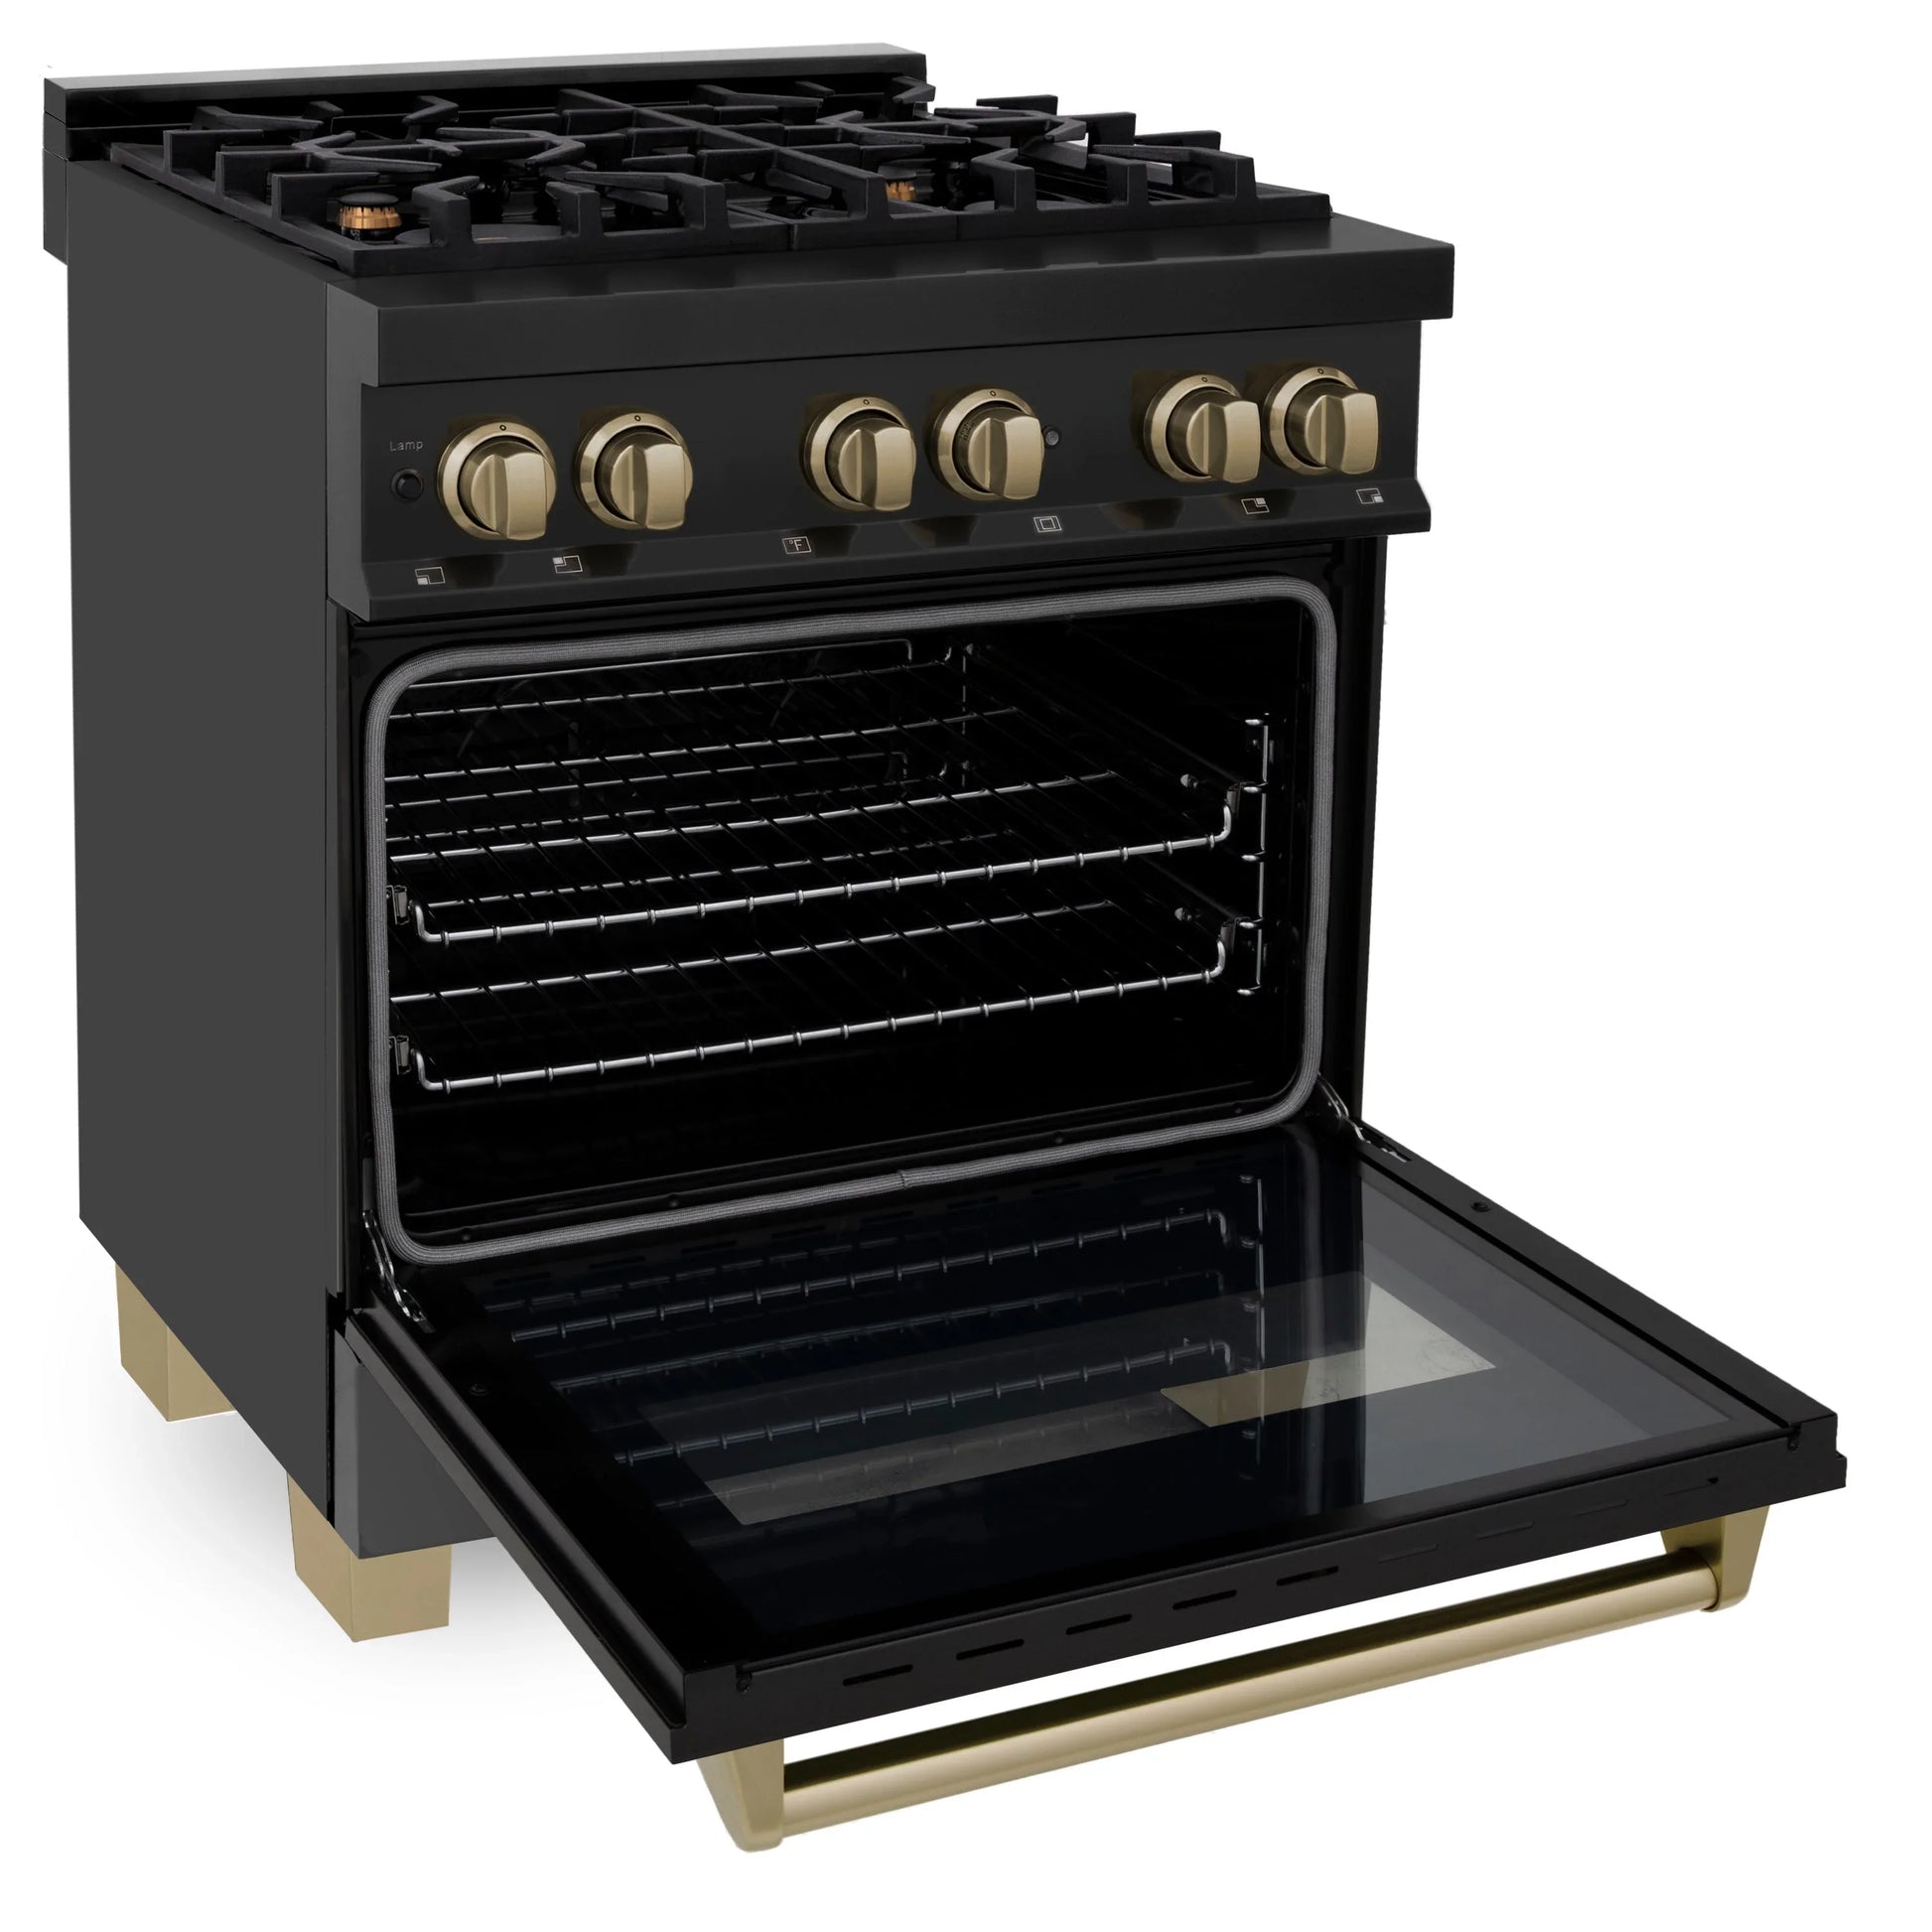 ZLINE Autograph Edition 30" Dual Fuel Range with Gas Stove and Electric Oven - Black Stainless Steel, Champagne Bronze Accents